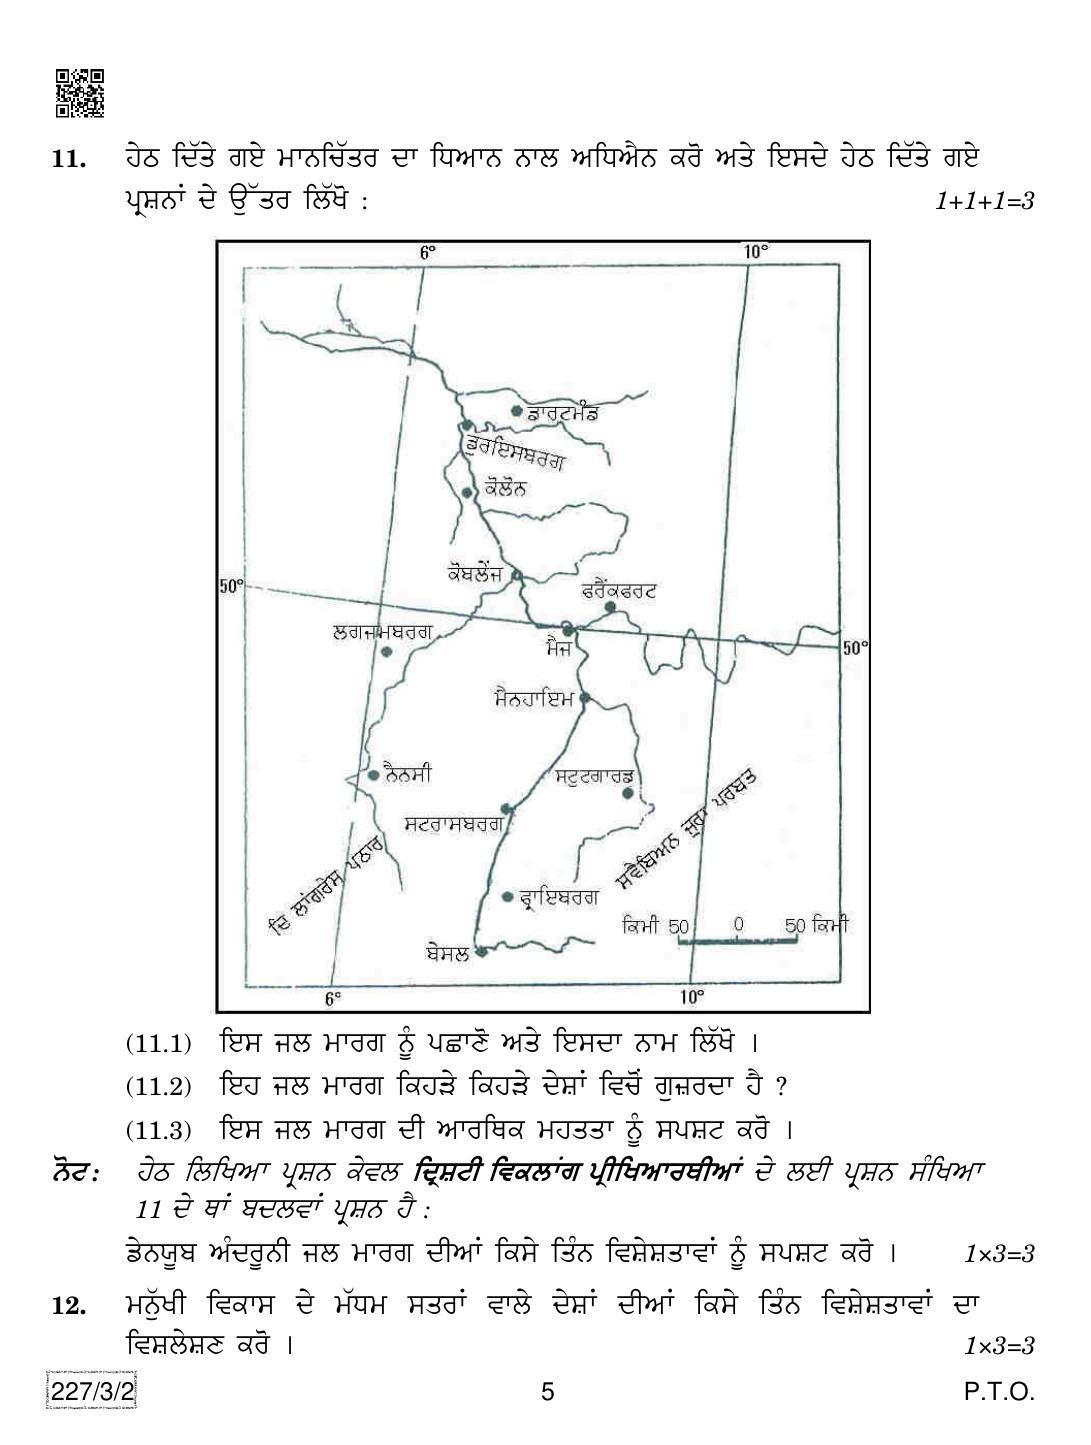 CBSE Class 12 227-3-2 Geography (Punjabi) 2019 Question Paper - Page 5